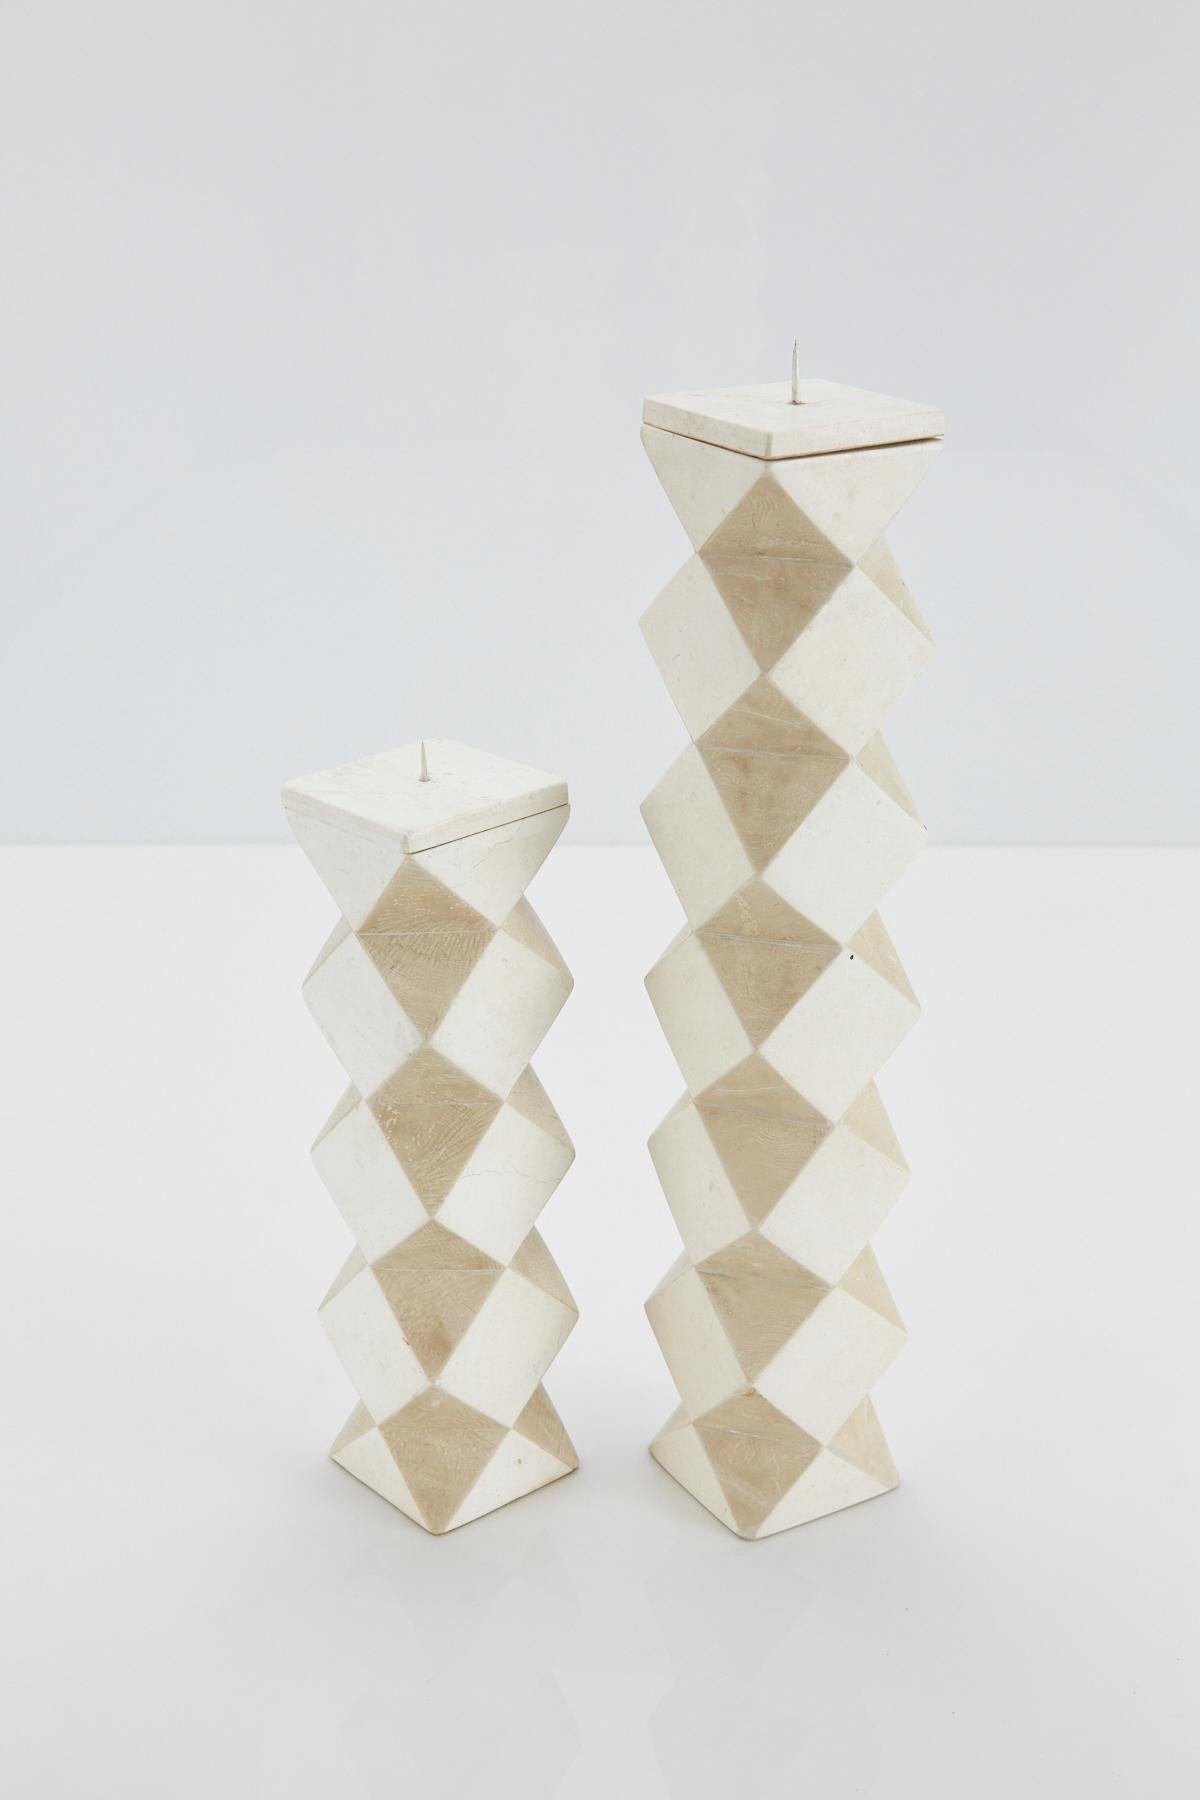 Metal Convertible Faceted Postmodern Tessellated Stone Candlestick or Vase, 1990s For Sale